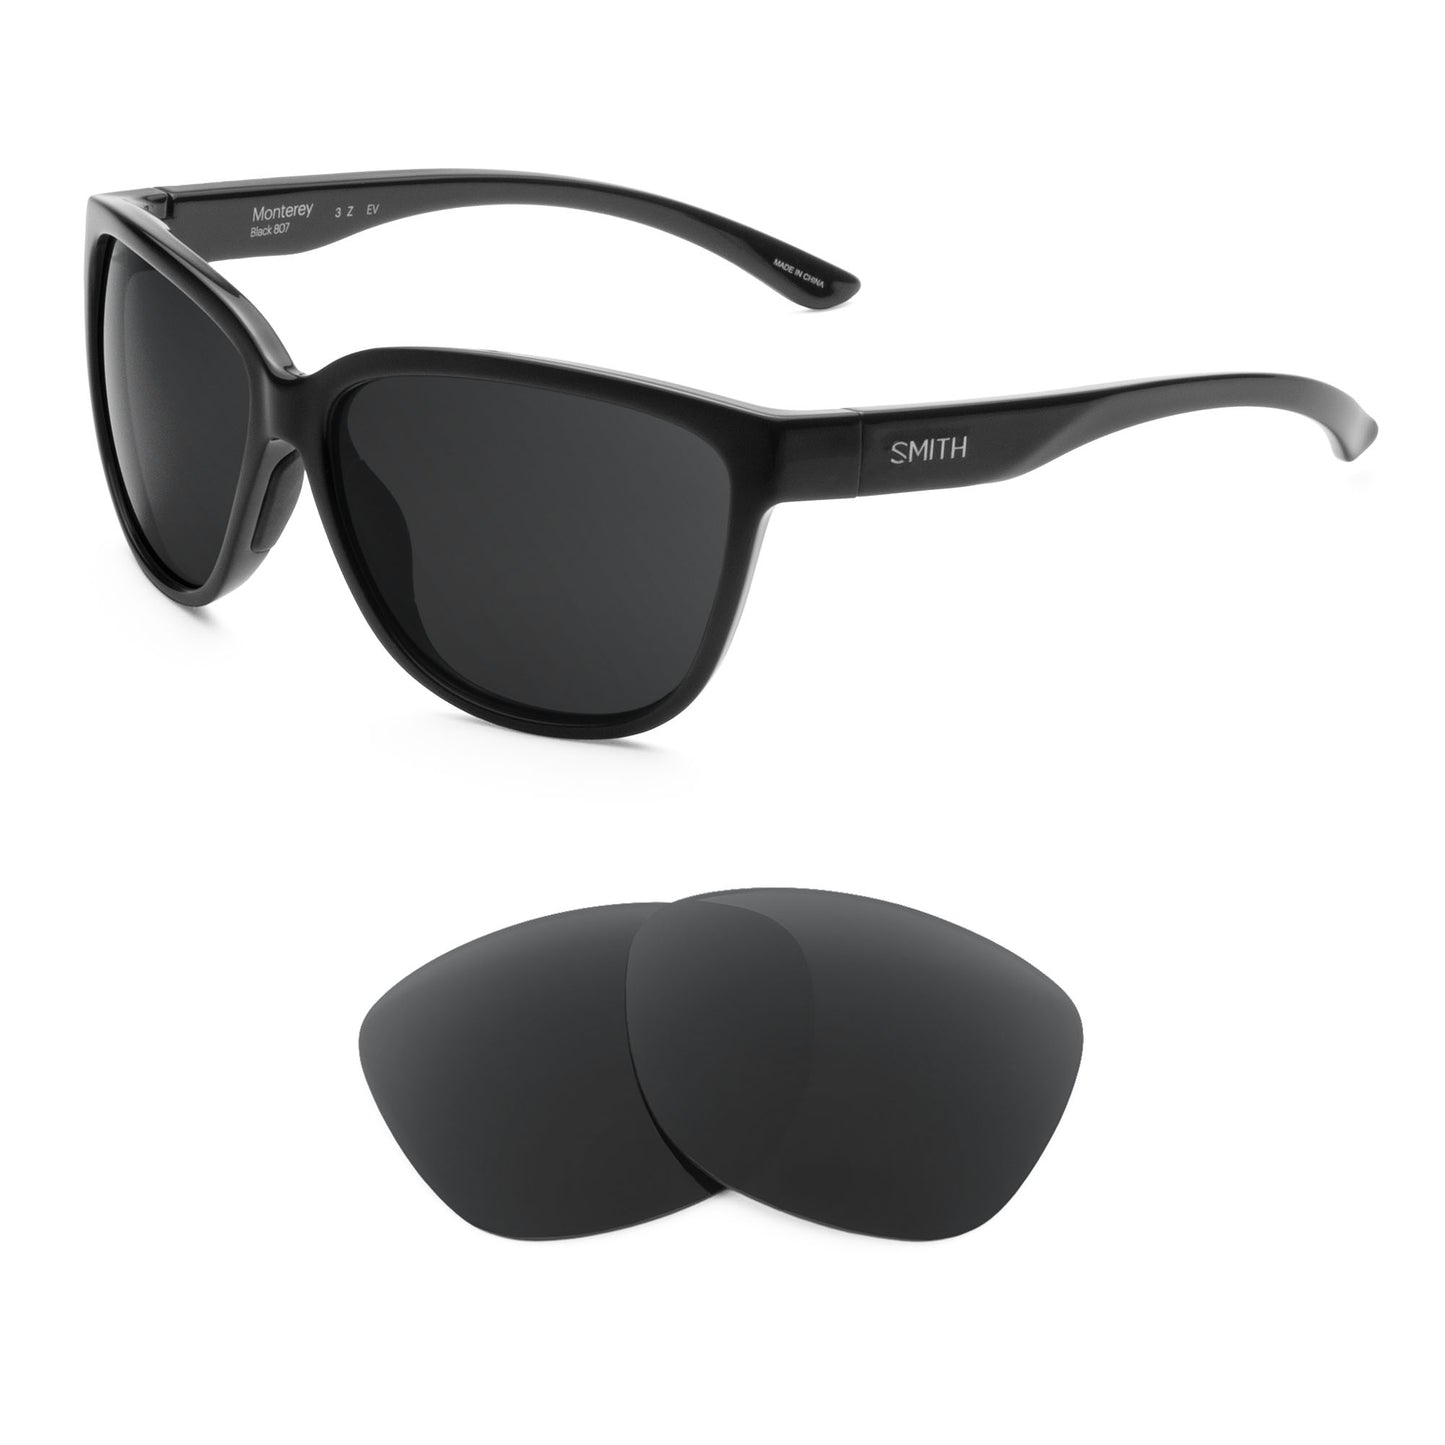 Smith Monterey sunglasses with replacement lenses